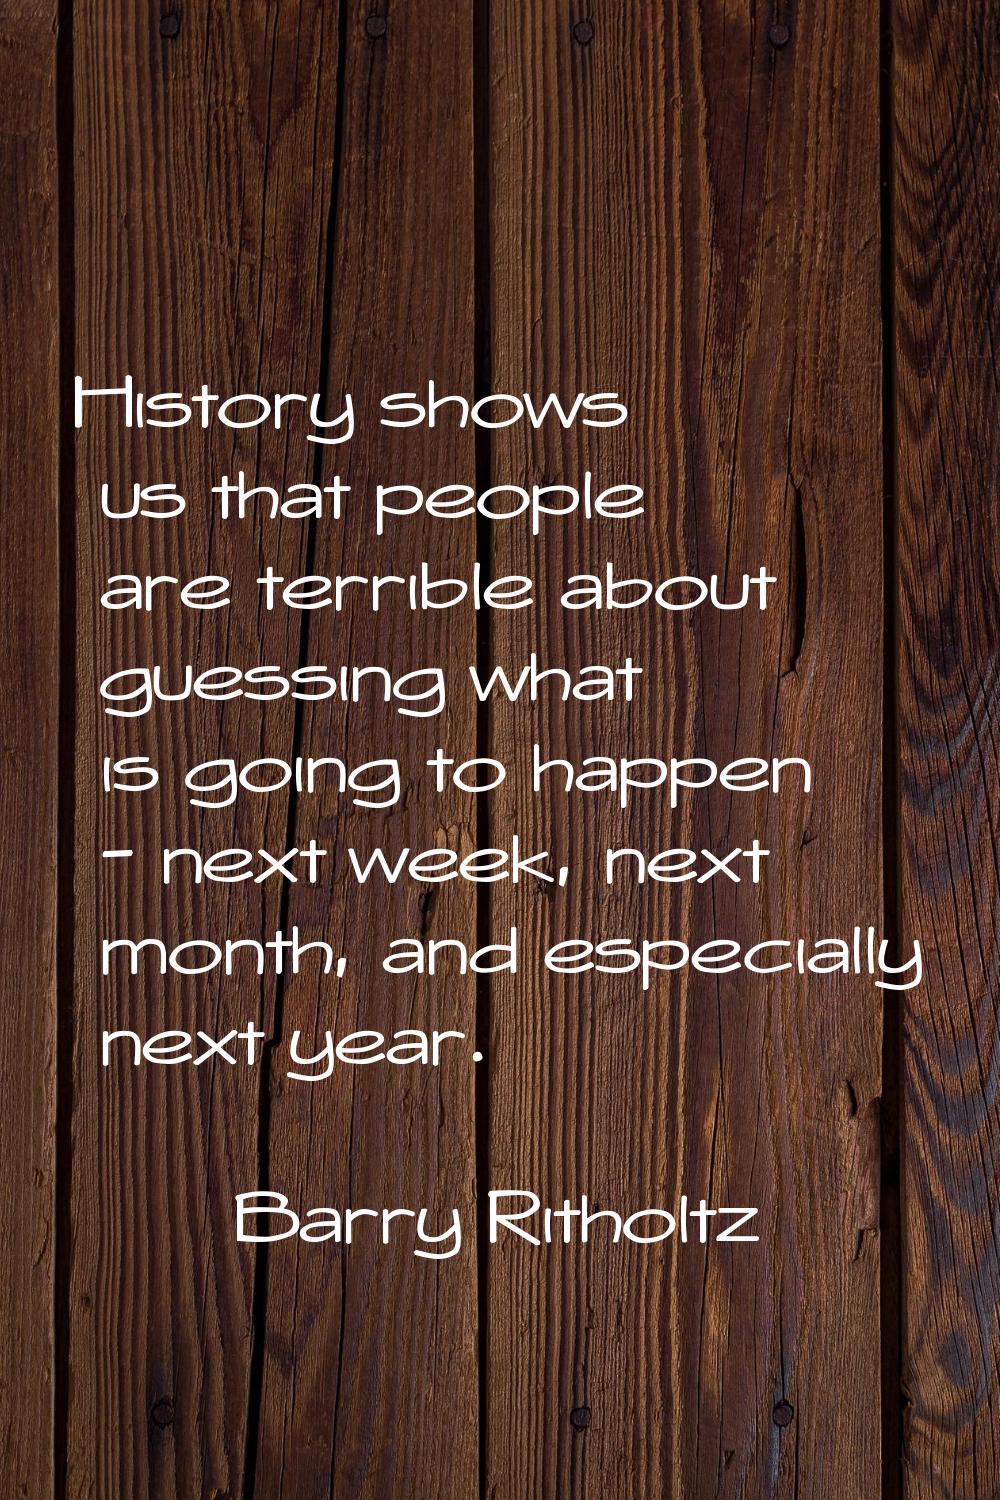 History shows us that people are terrible about guessing what is going to happen - next week, next 